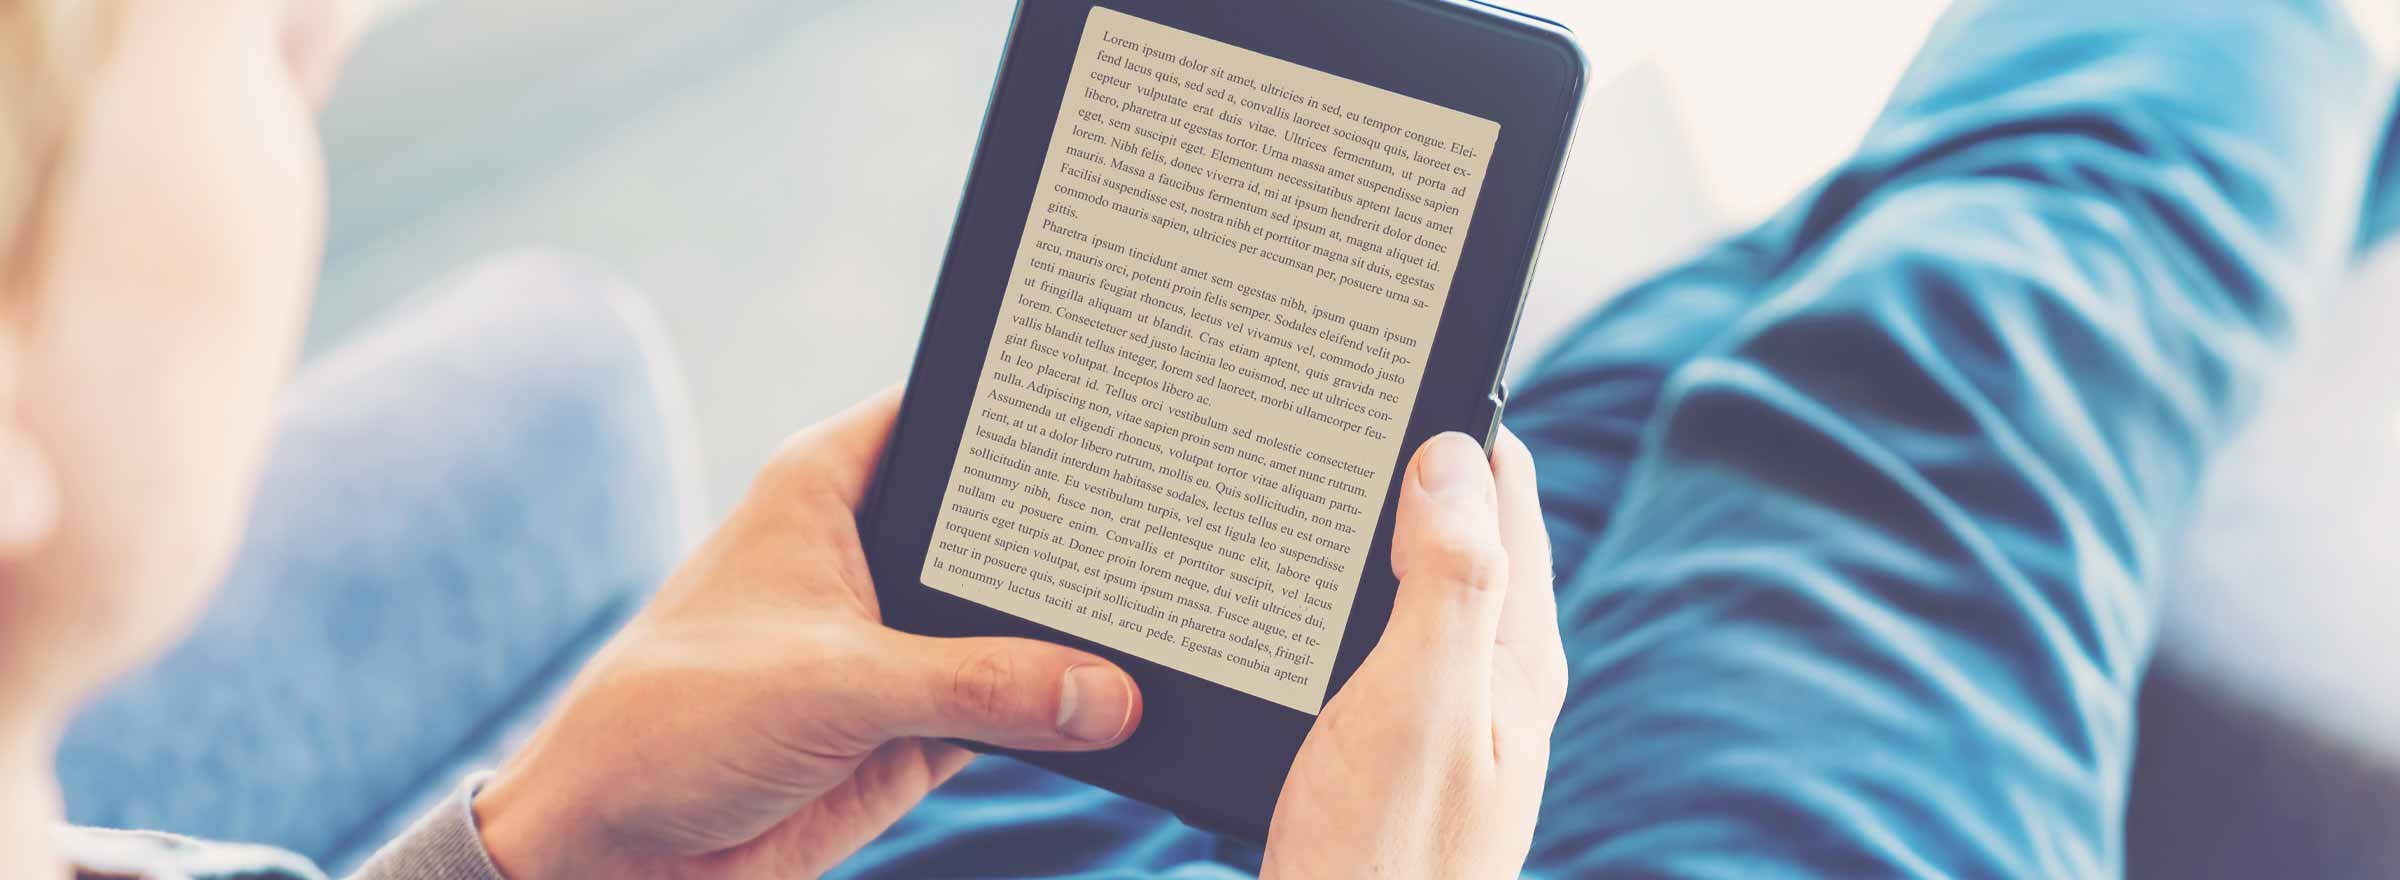 person reading text on an e-reader